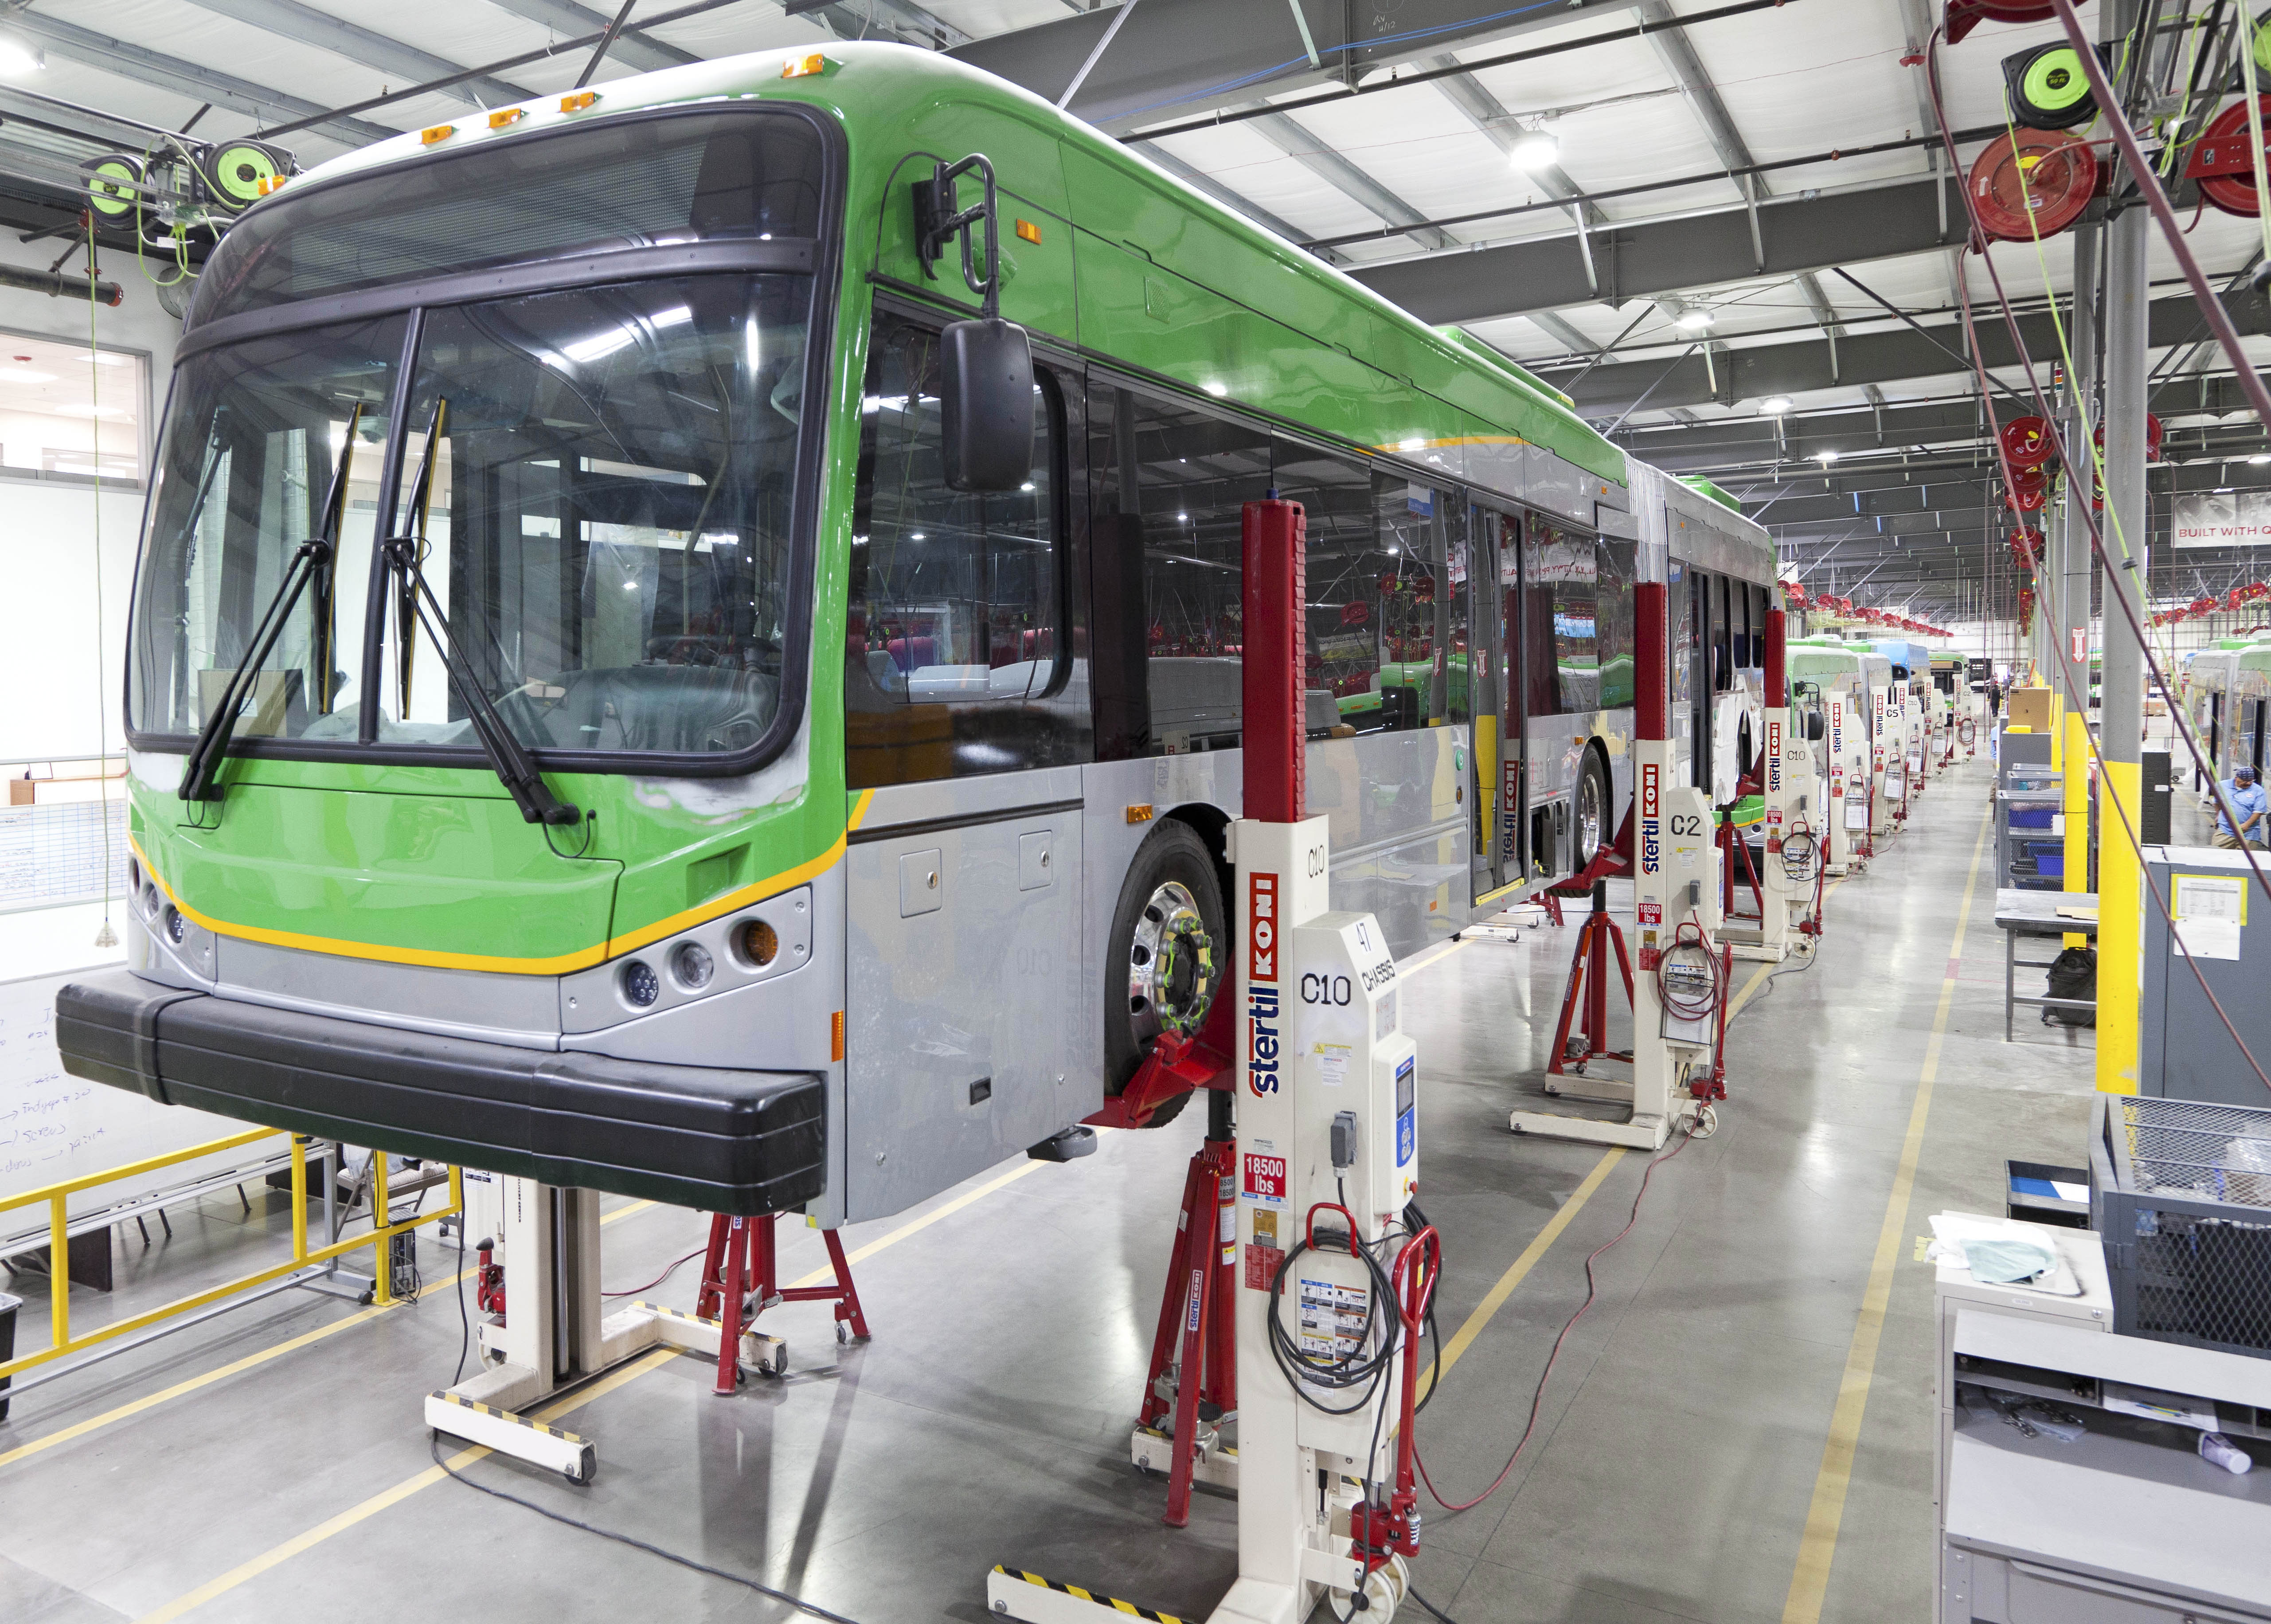 Stertil-Koni Mobile Column Lifts support the BYD manufacturing process